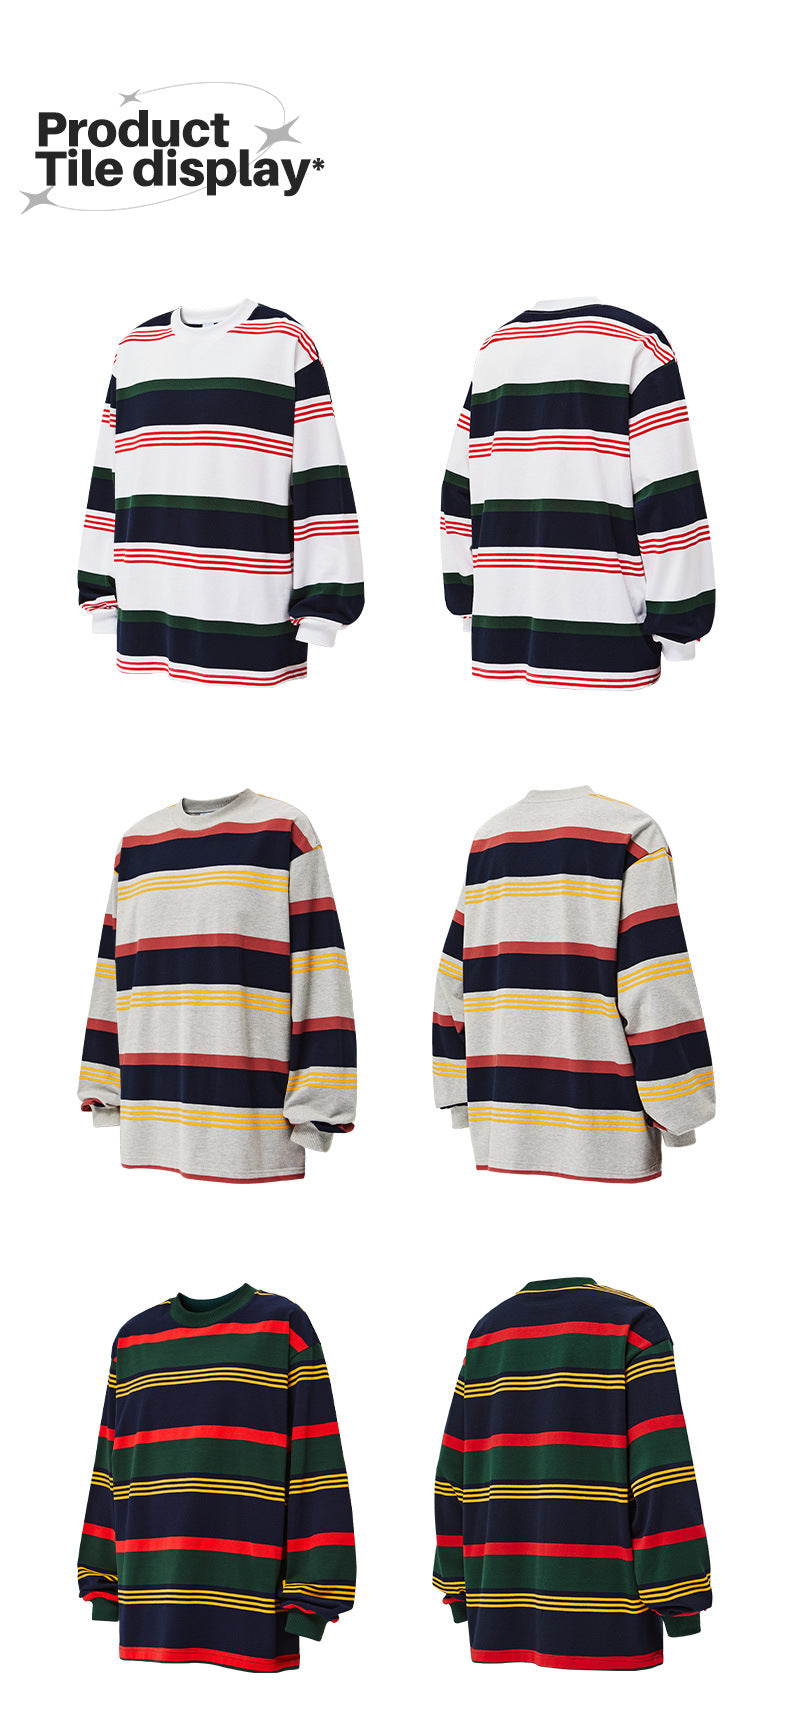 Contrast Striped Long-sleeve T-shirt 2483S23